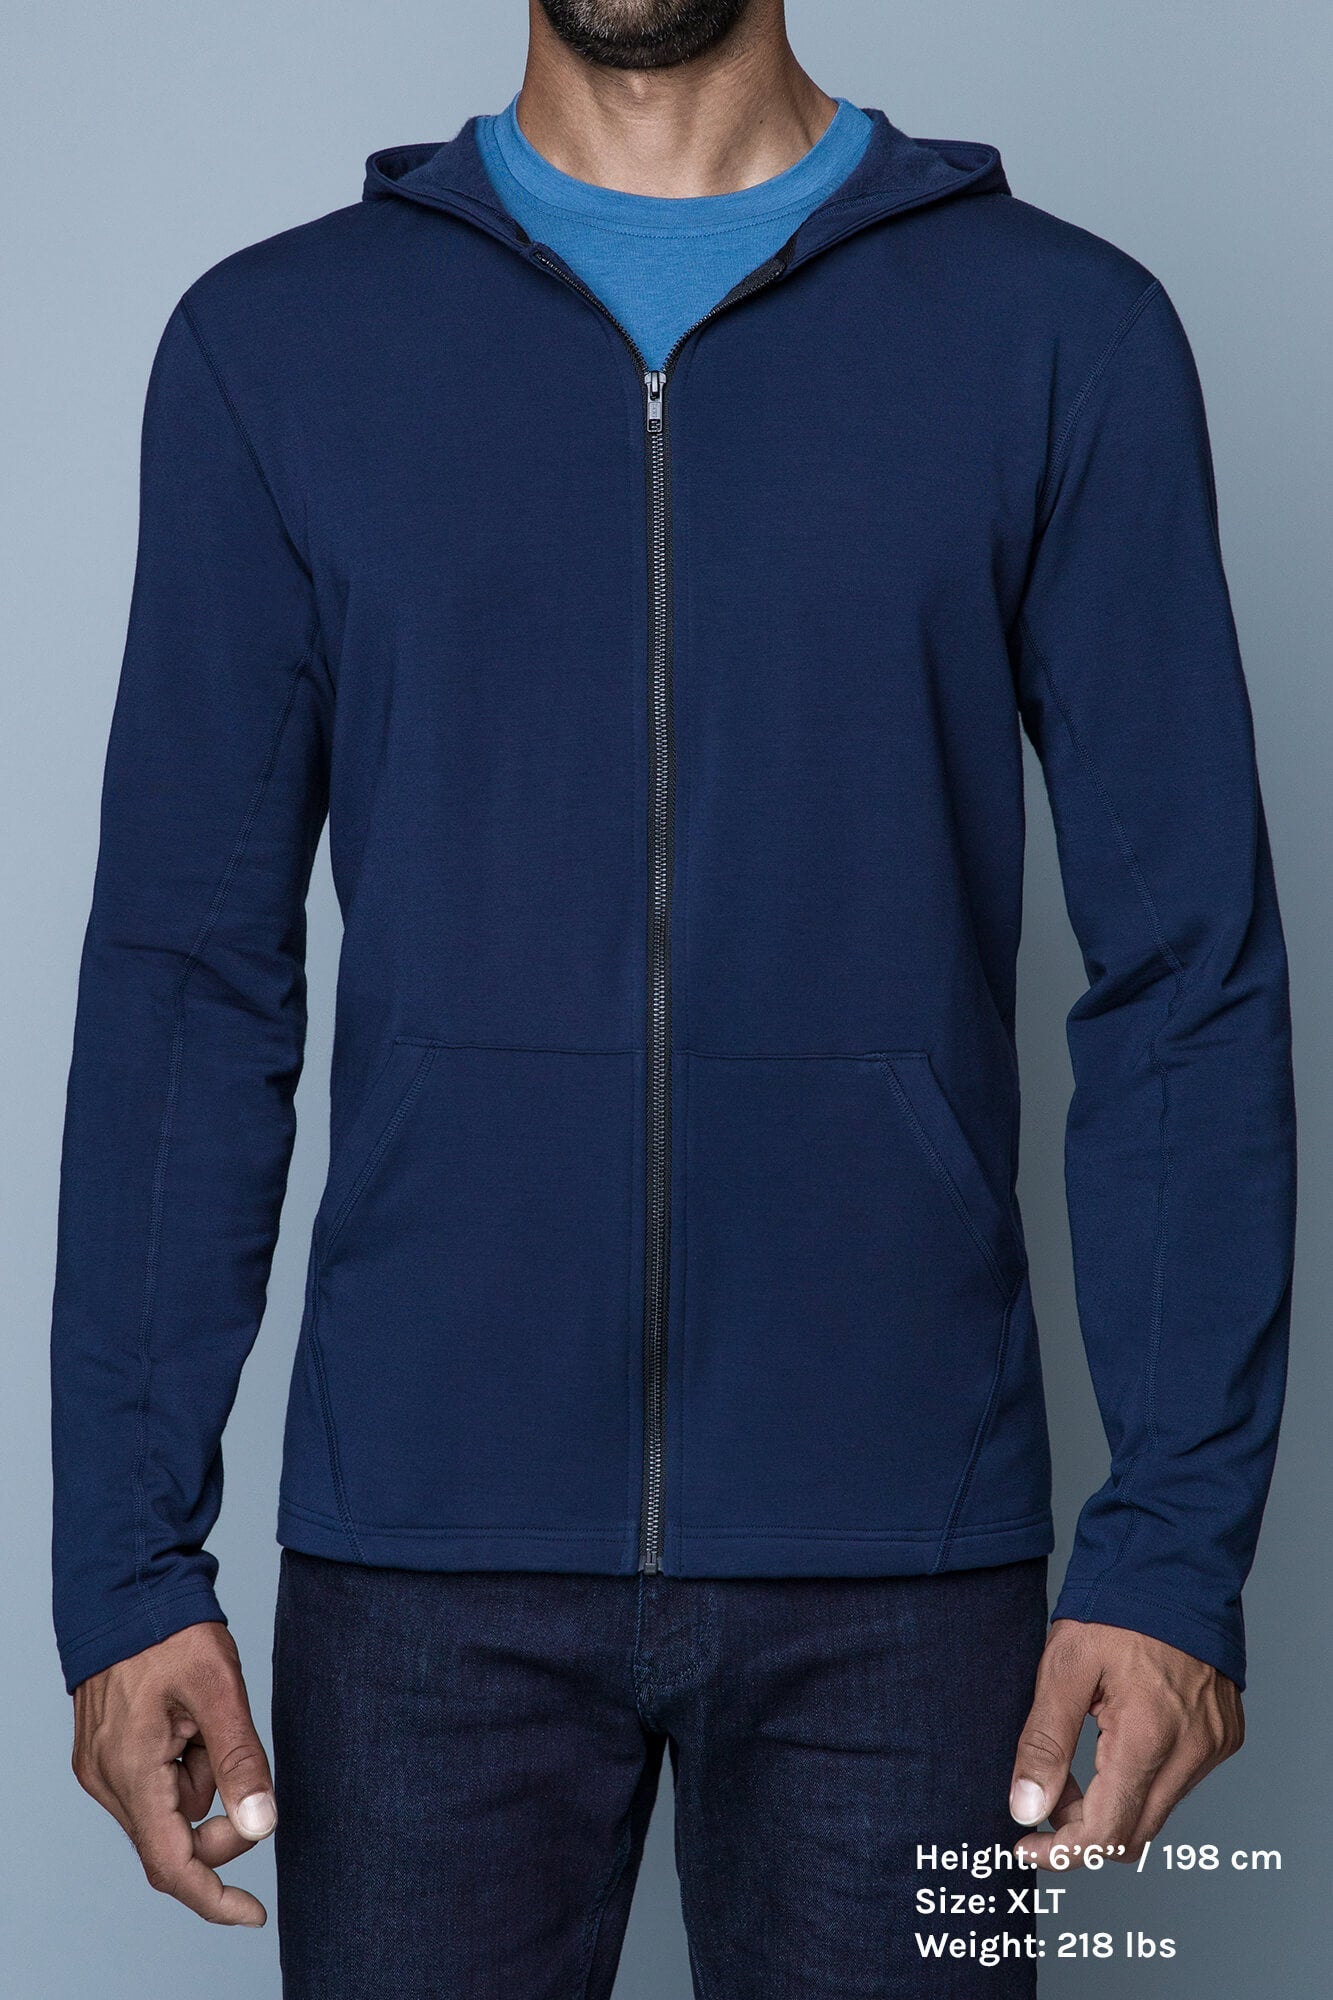 The Navas Lab Hawkins tall hoodie in blue. This perfect tall slim hoodie for tall and slim guys looking for style and comfort. Tall skinny guy sweater hoodie in blue.